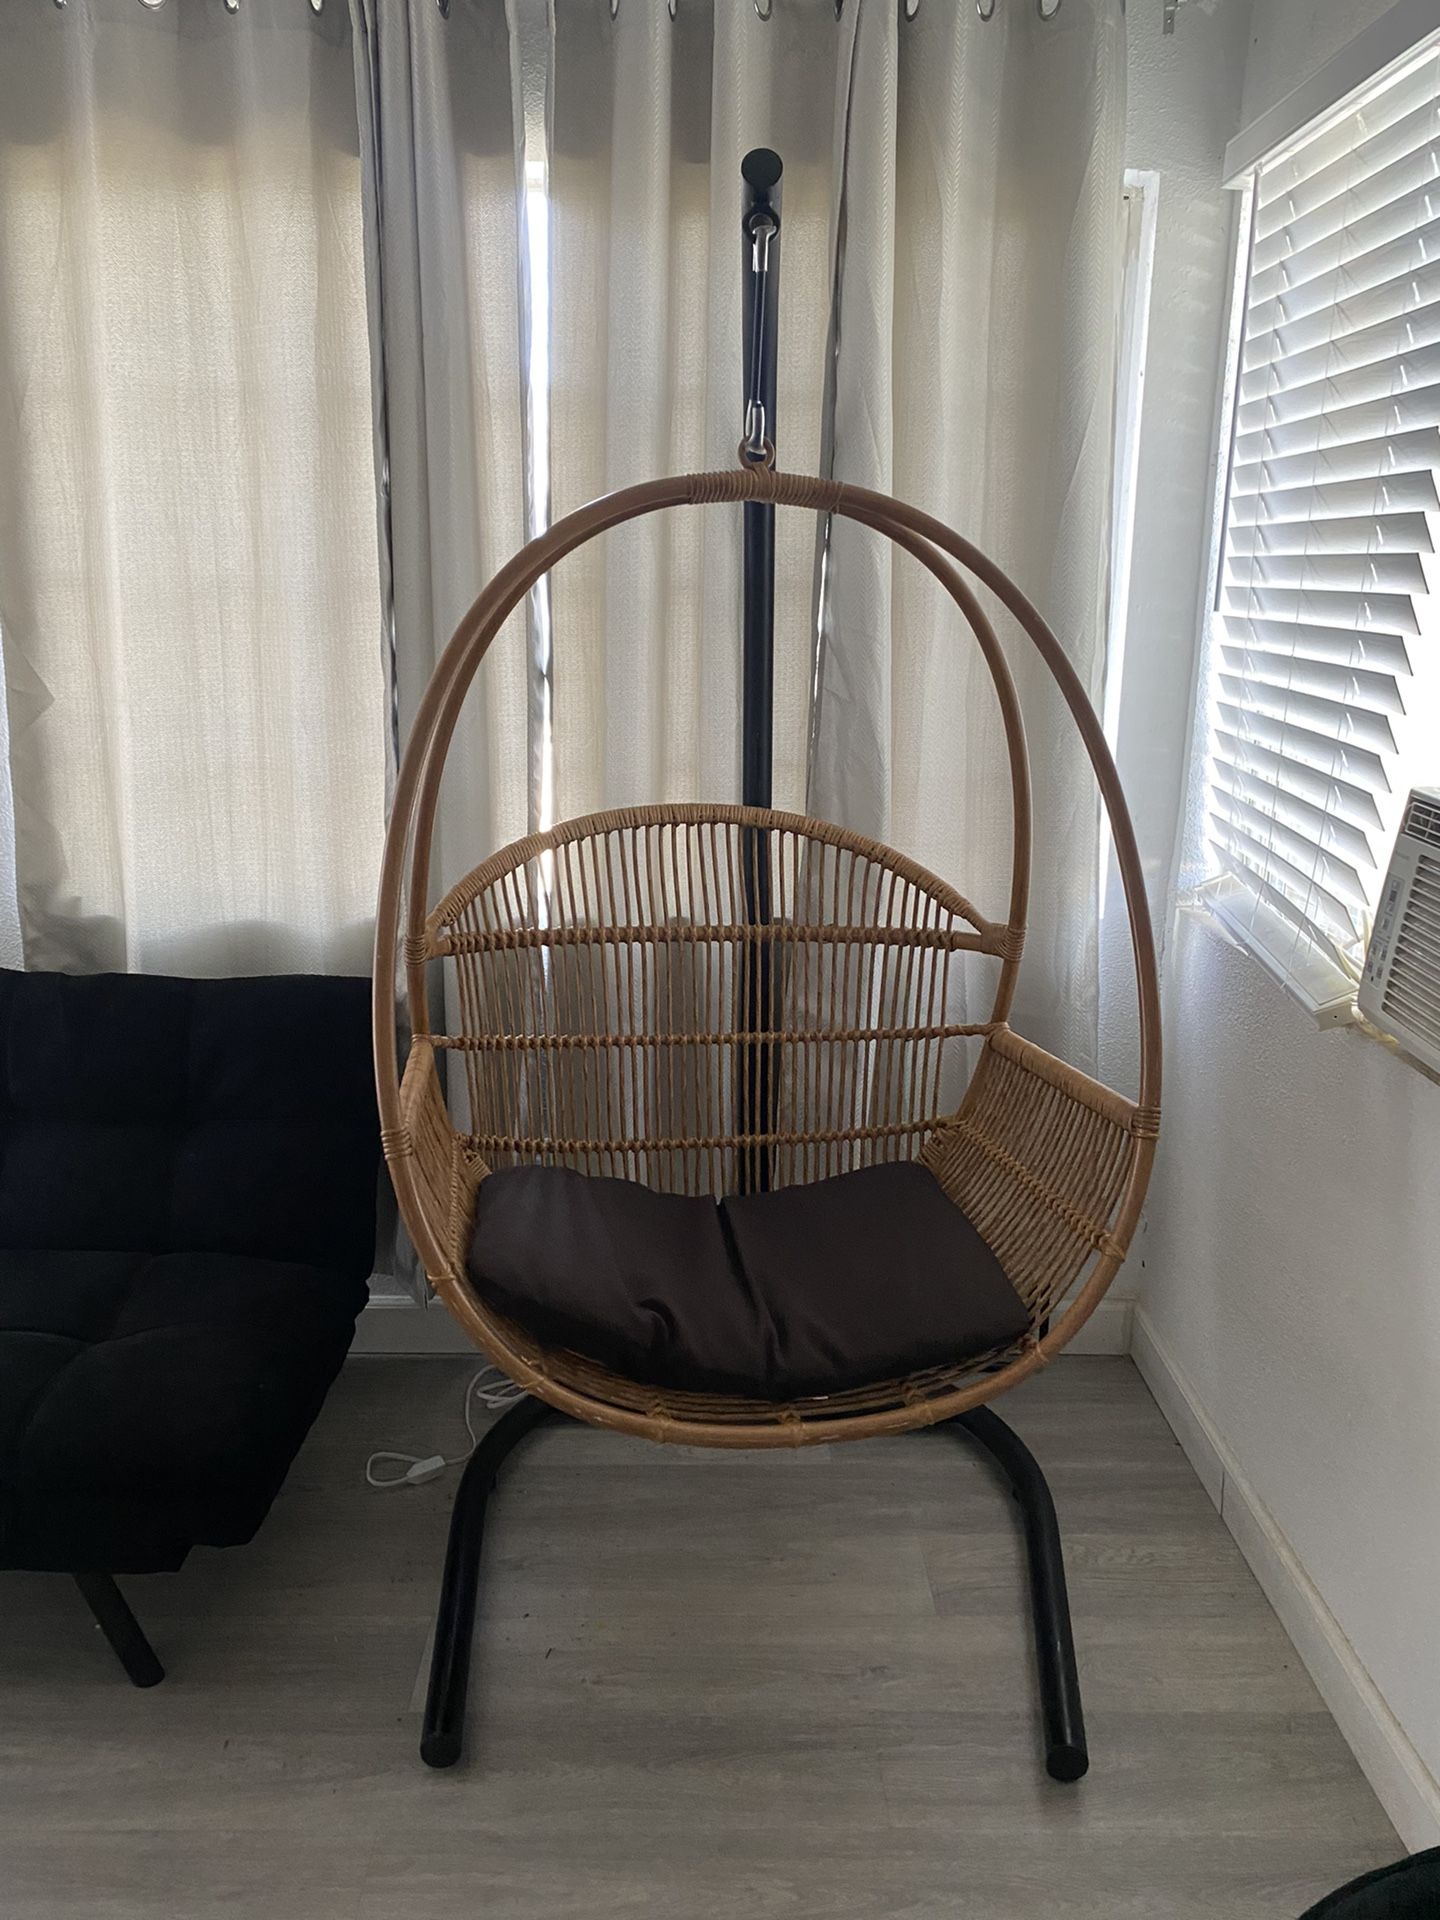 Hanging Egg Chair Adult size 